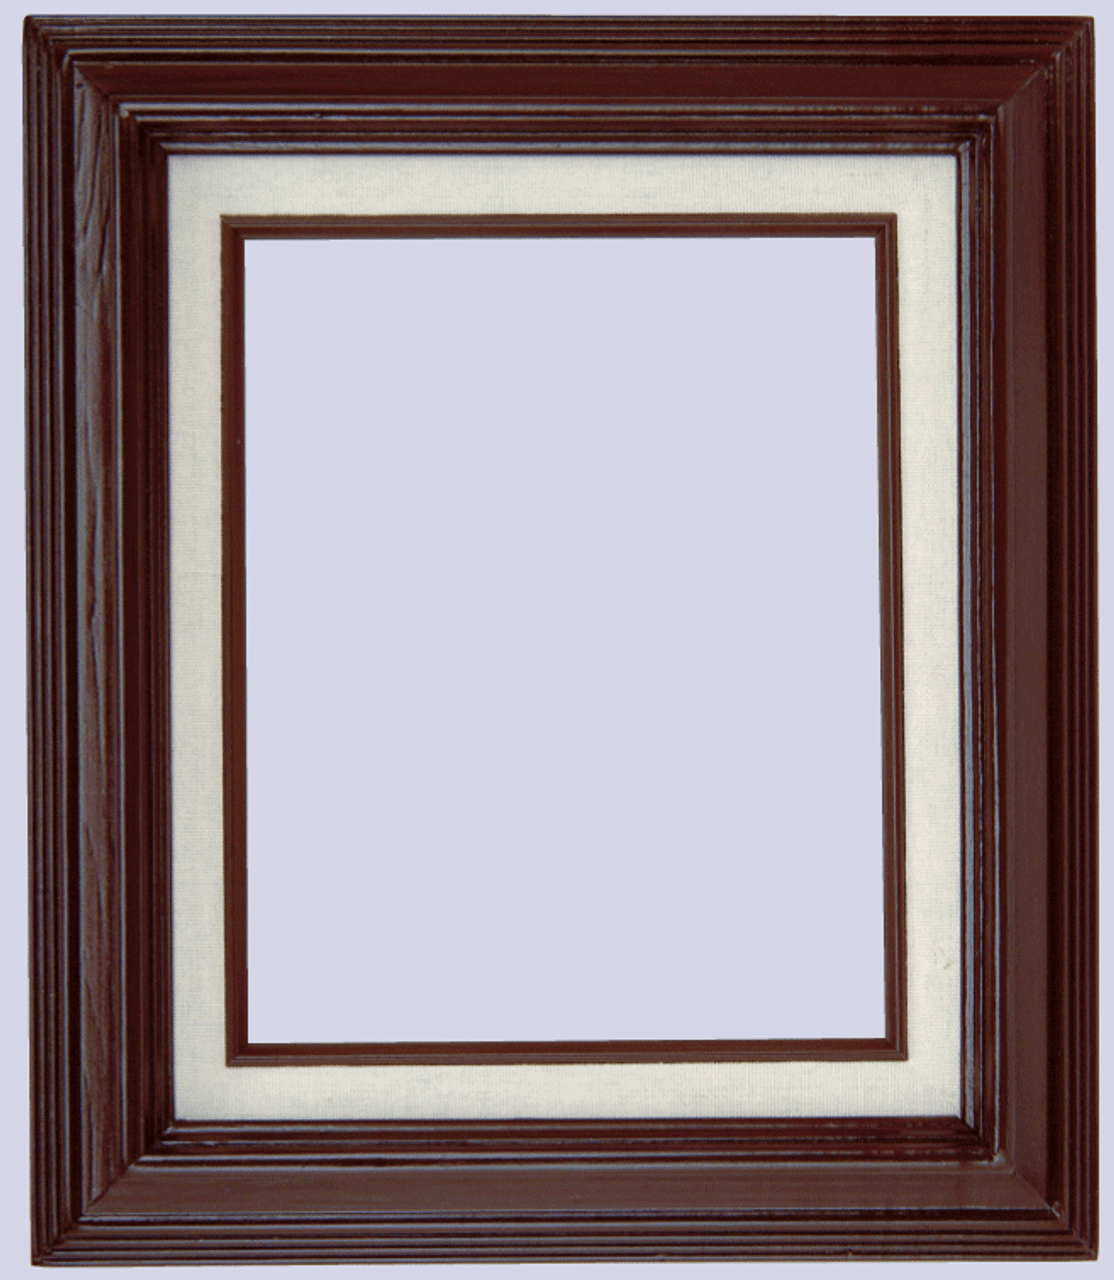 3 Inch Econo Wood Frames With Linen Liners: 13X13